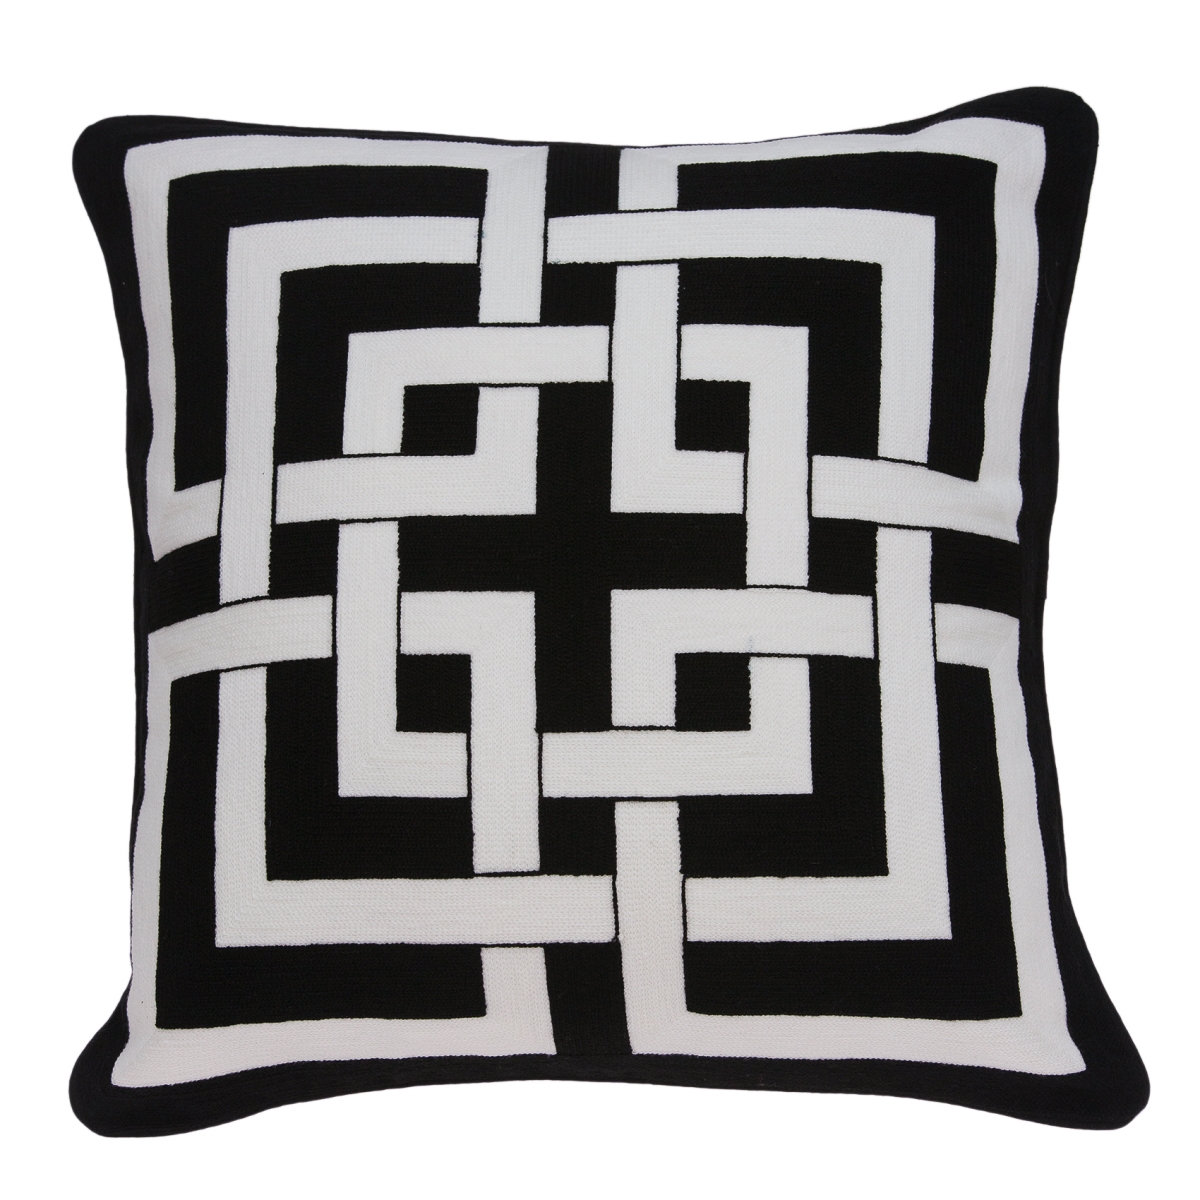 Pila11001d Abali Black & White Square Transitional Pillow Cover With Down Insert - 20 X 20 X 7 In.